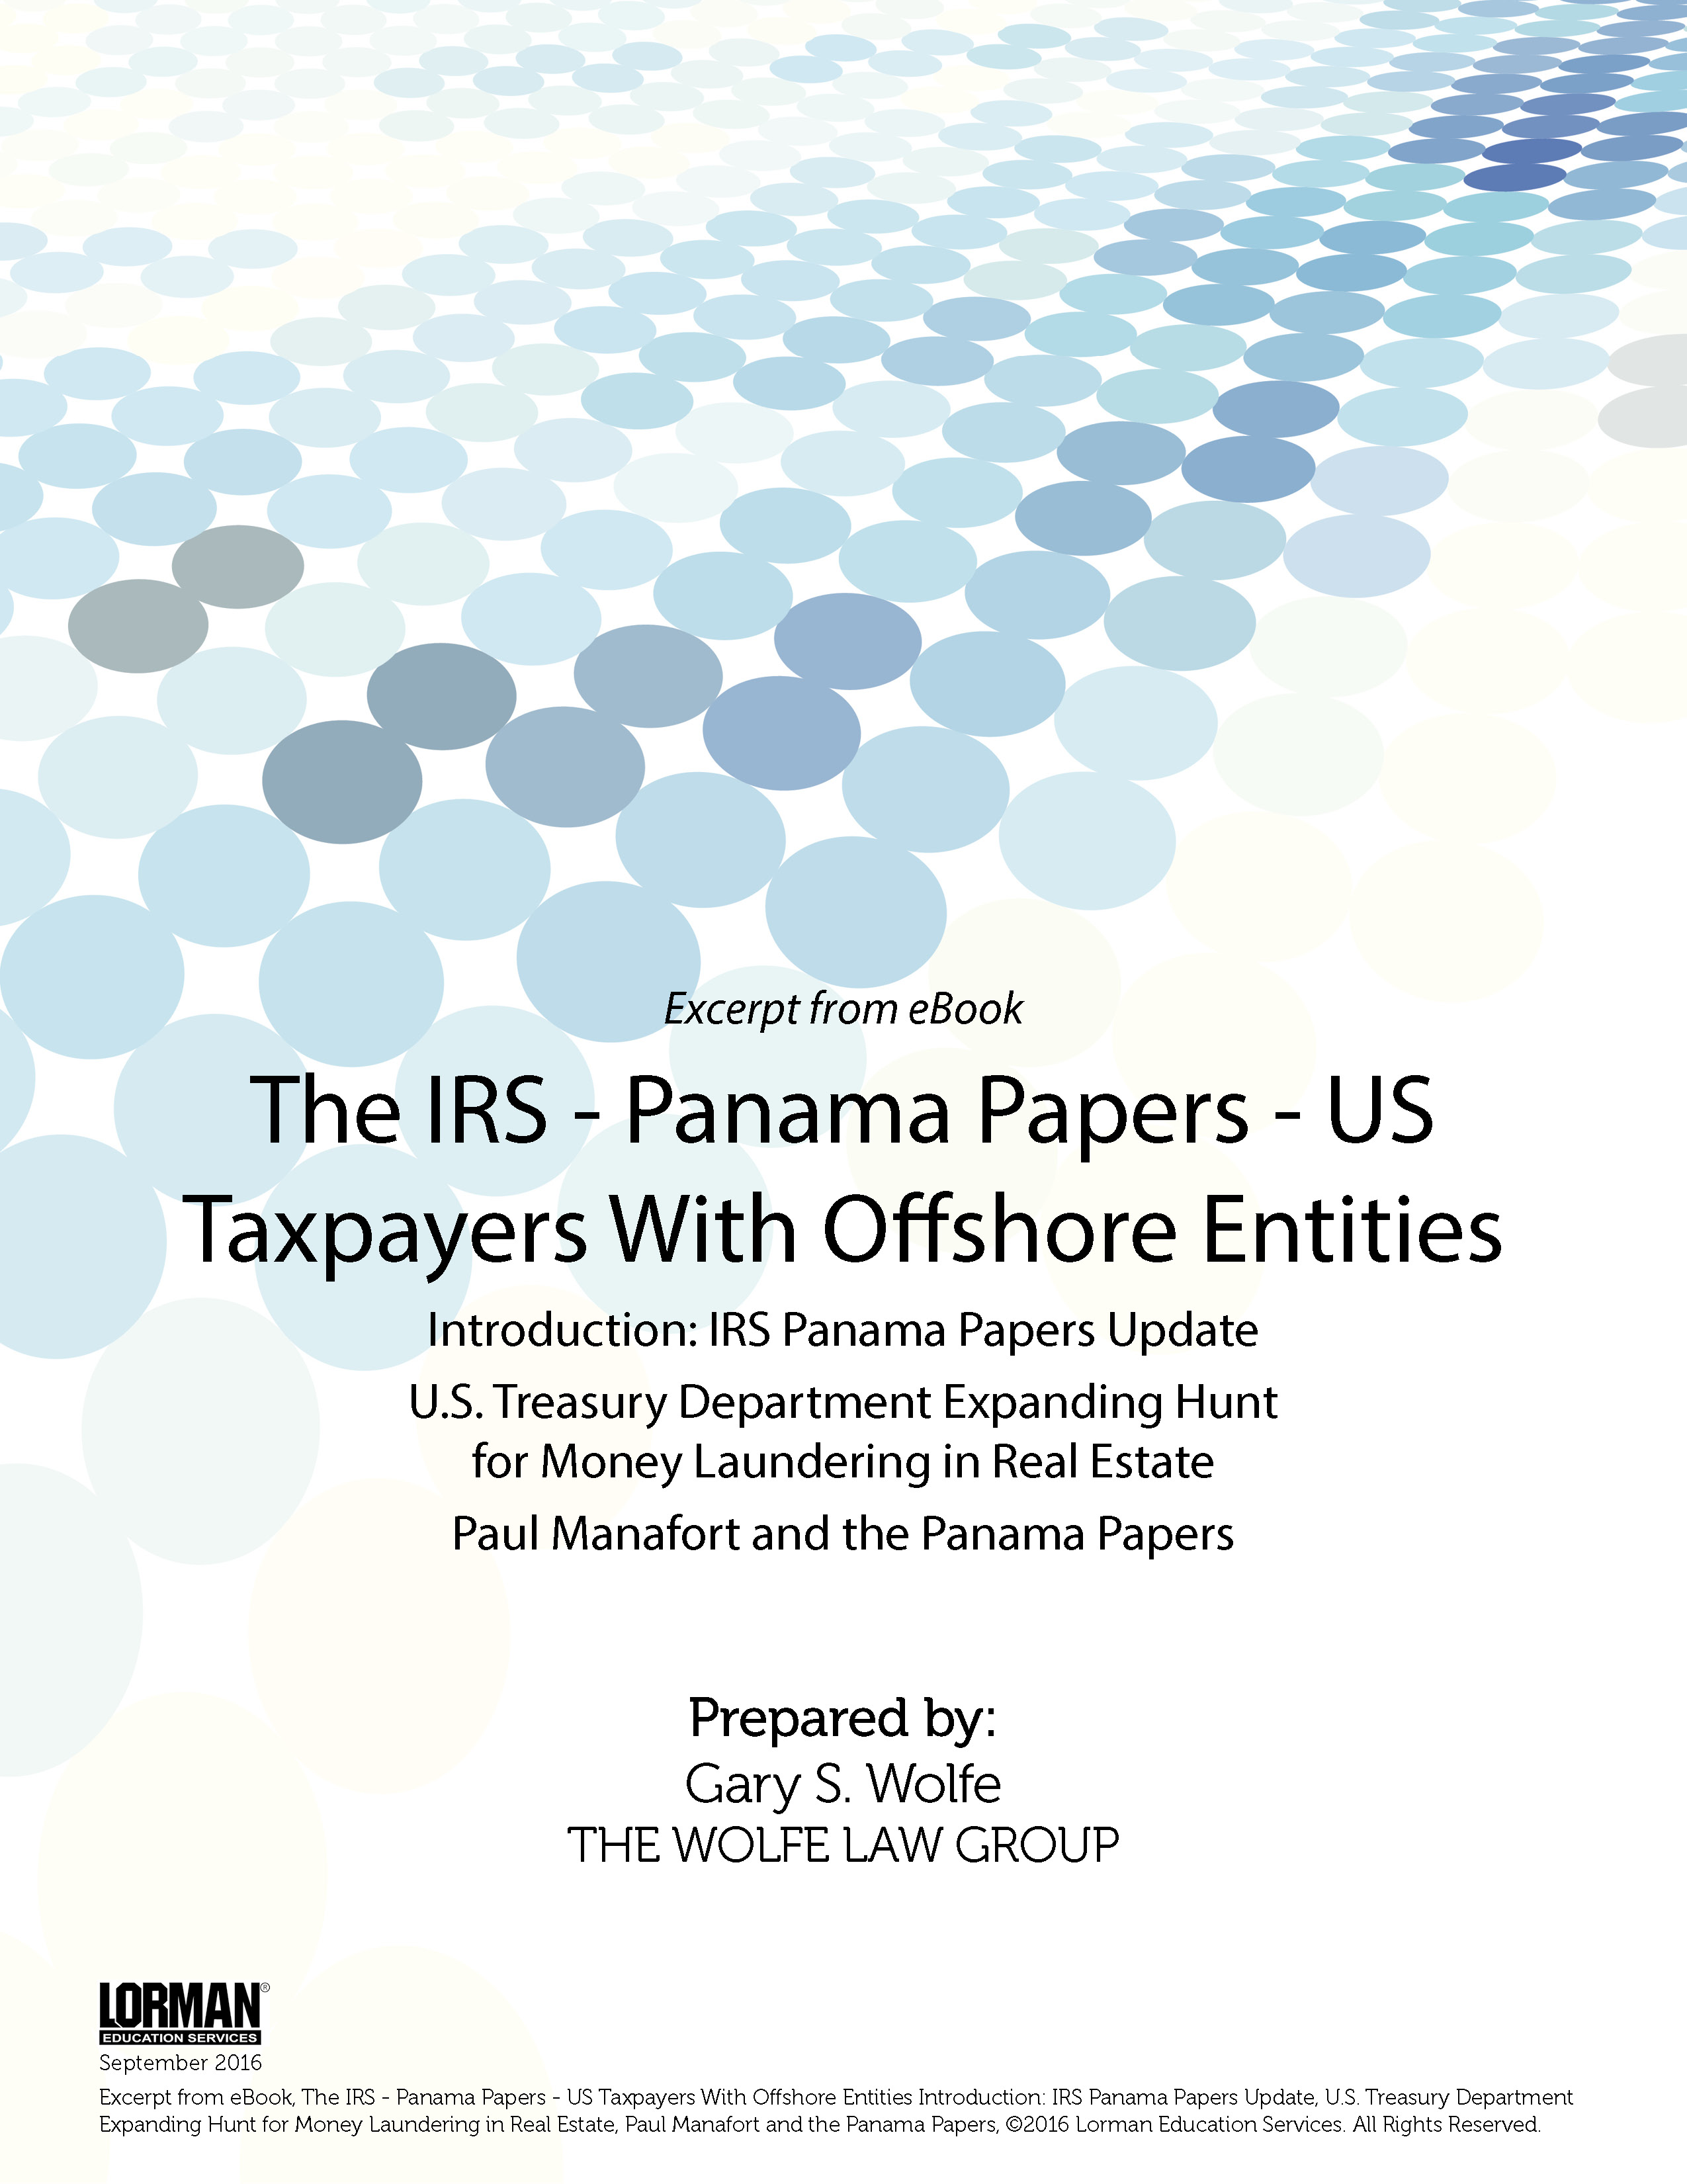 IRS-Panama Papers Update - U.S. Treasury Department Expand Hunt for Money Laundering in Real Estate